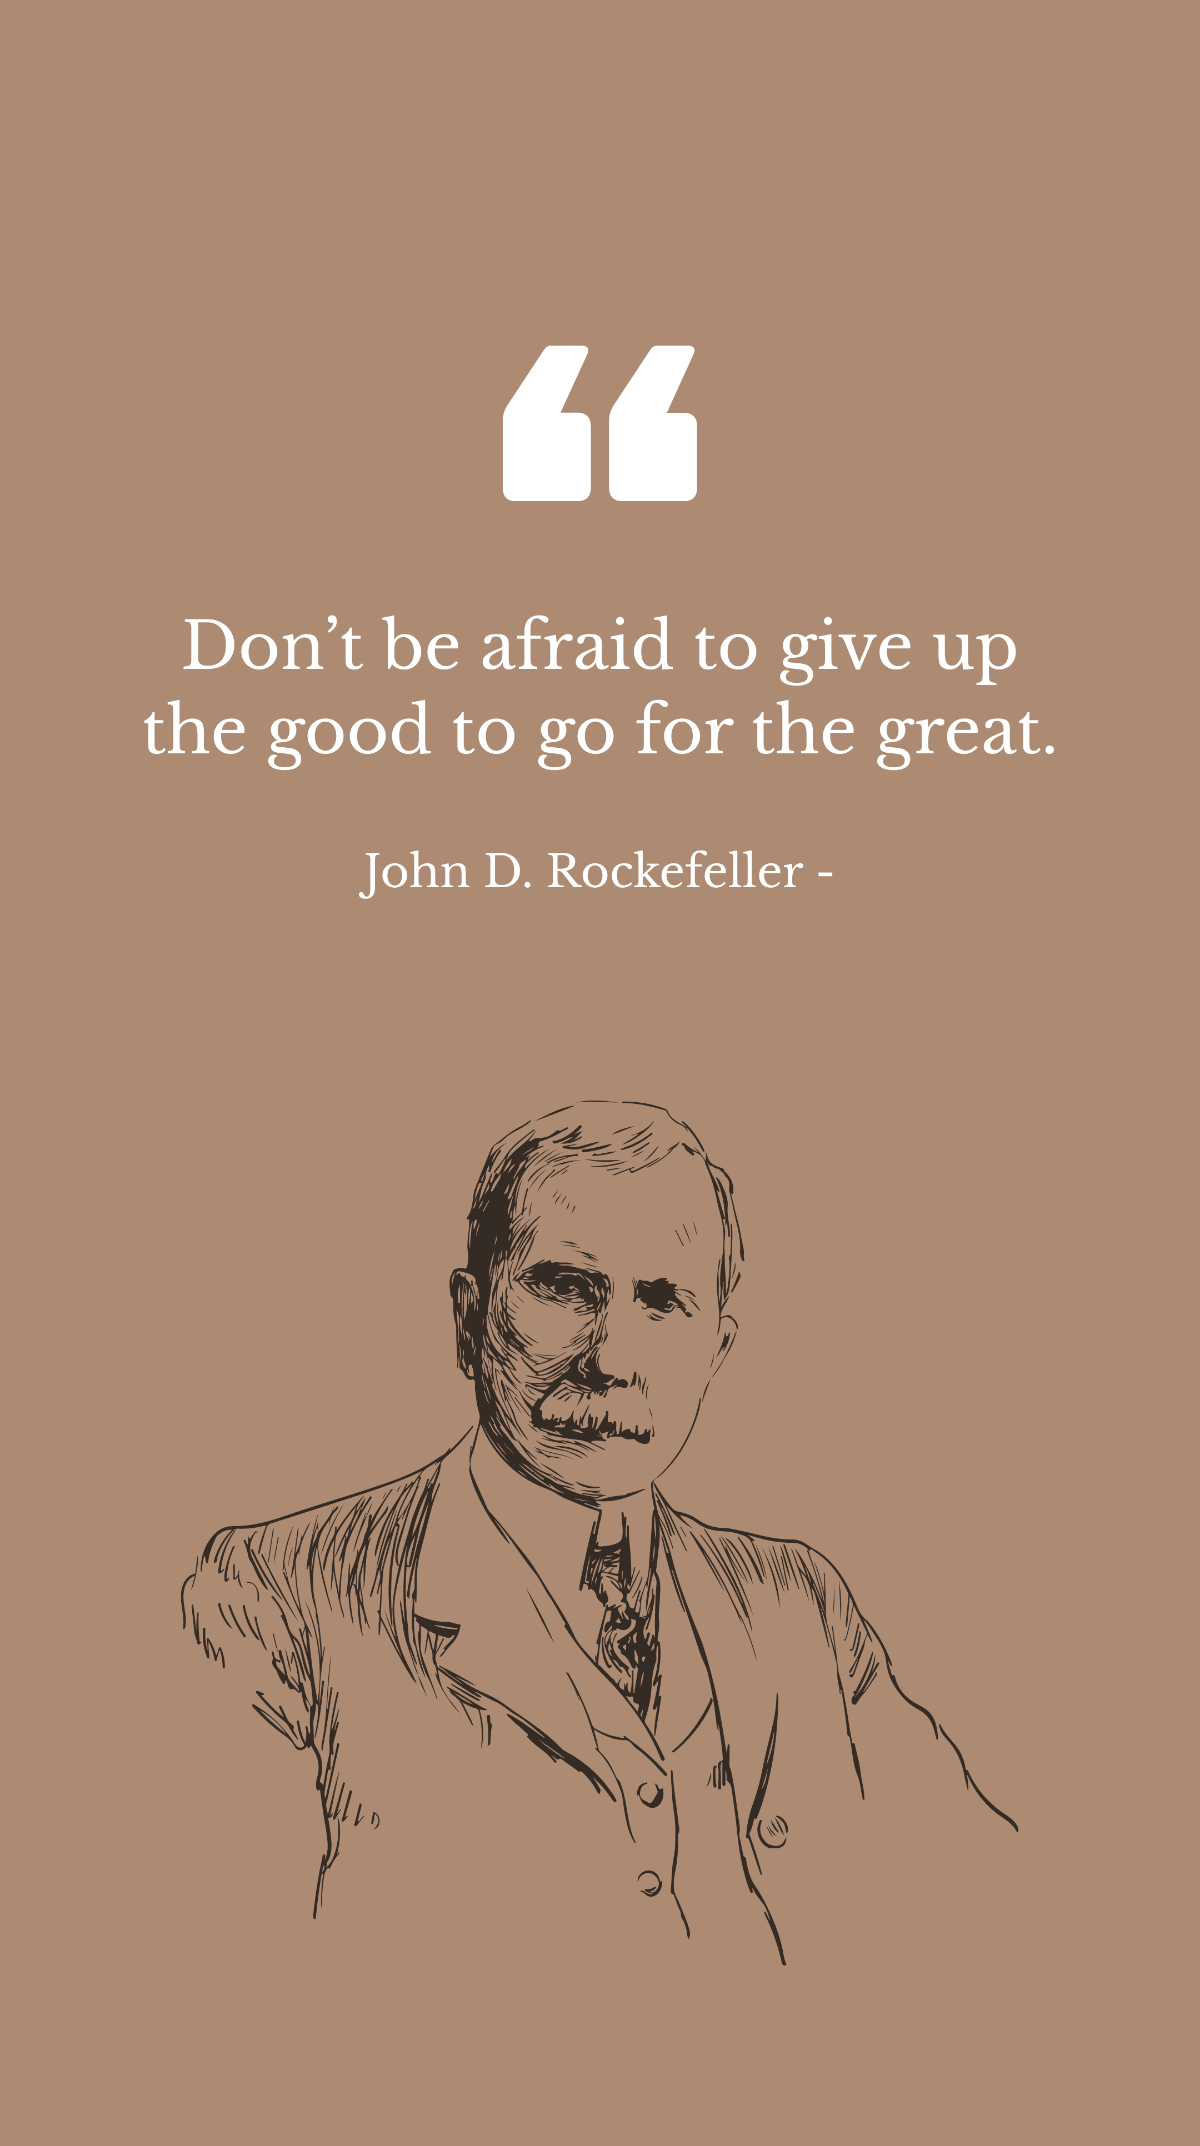 John D. Rockefeller - Don’t be afraid to give up the good to go for the great.